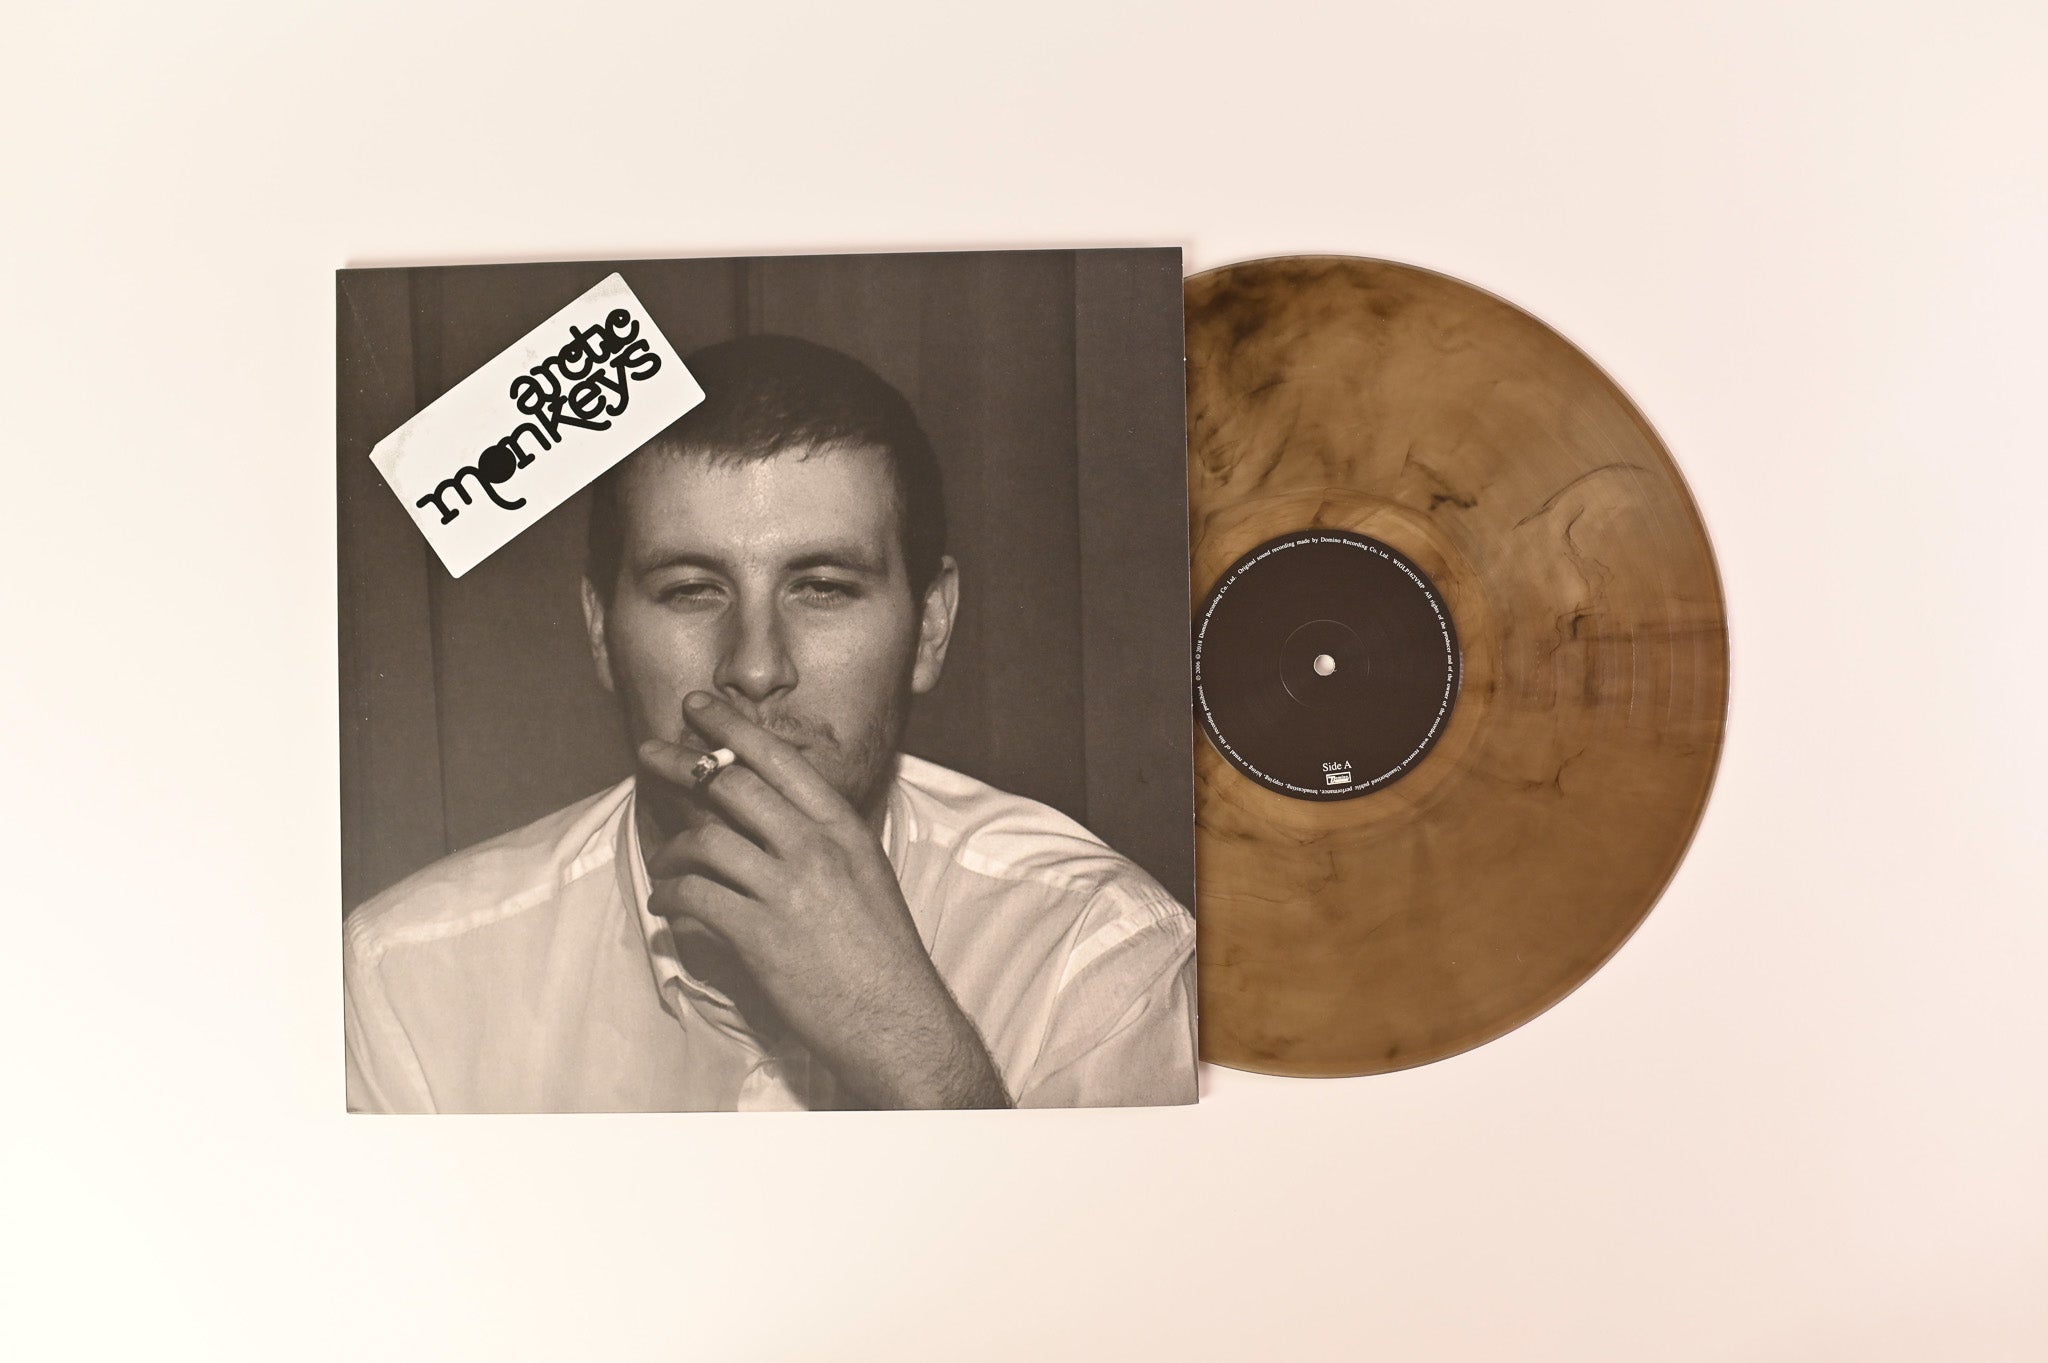 Arctic Monkeys - Whatever People Say I Am, That's What I'm Not on Domino Gray w/Black Smoke Reissue